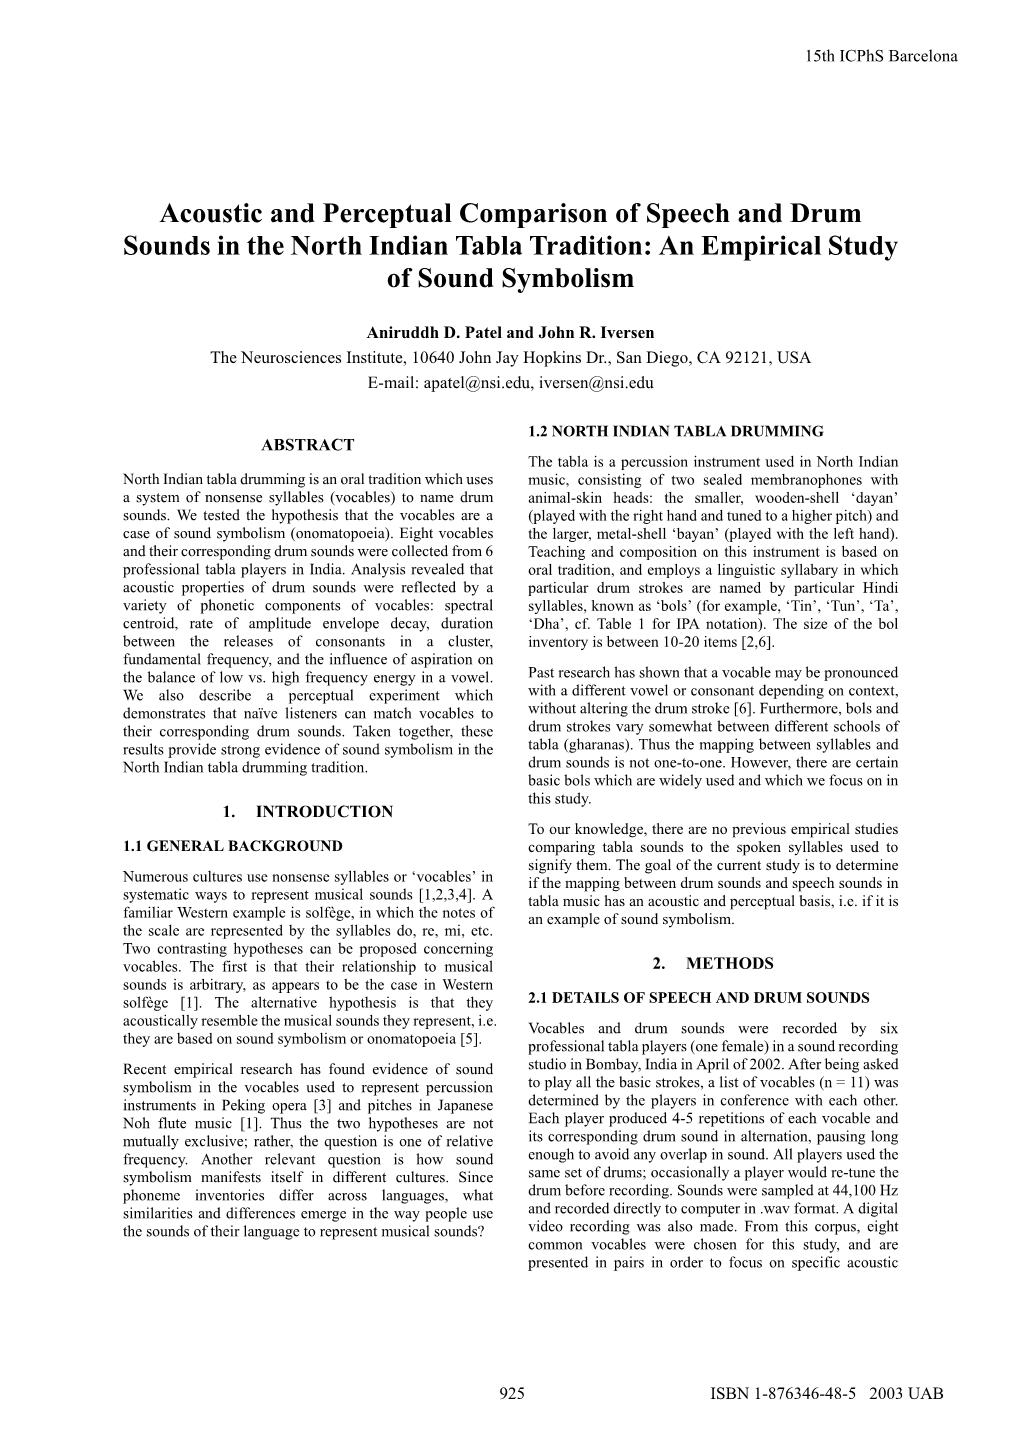 Acoustic and Perceptual Comparison of Speech and Drum Sounds in the North Indian Tabla Tradition: an Empirical Study of Sound Symbolism